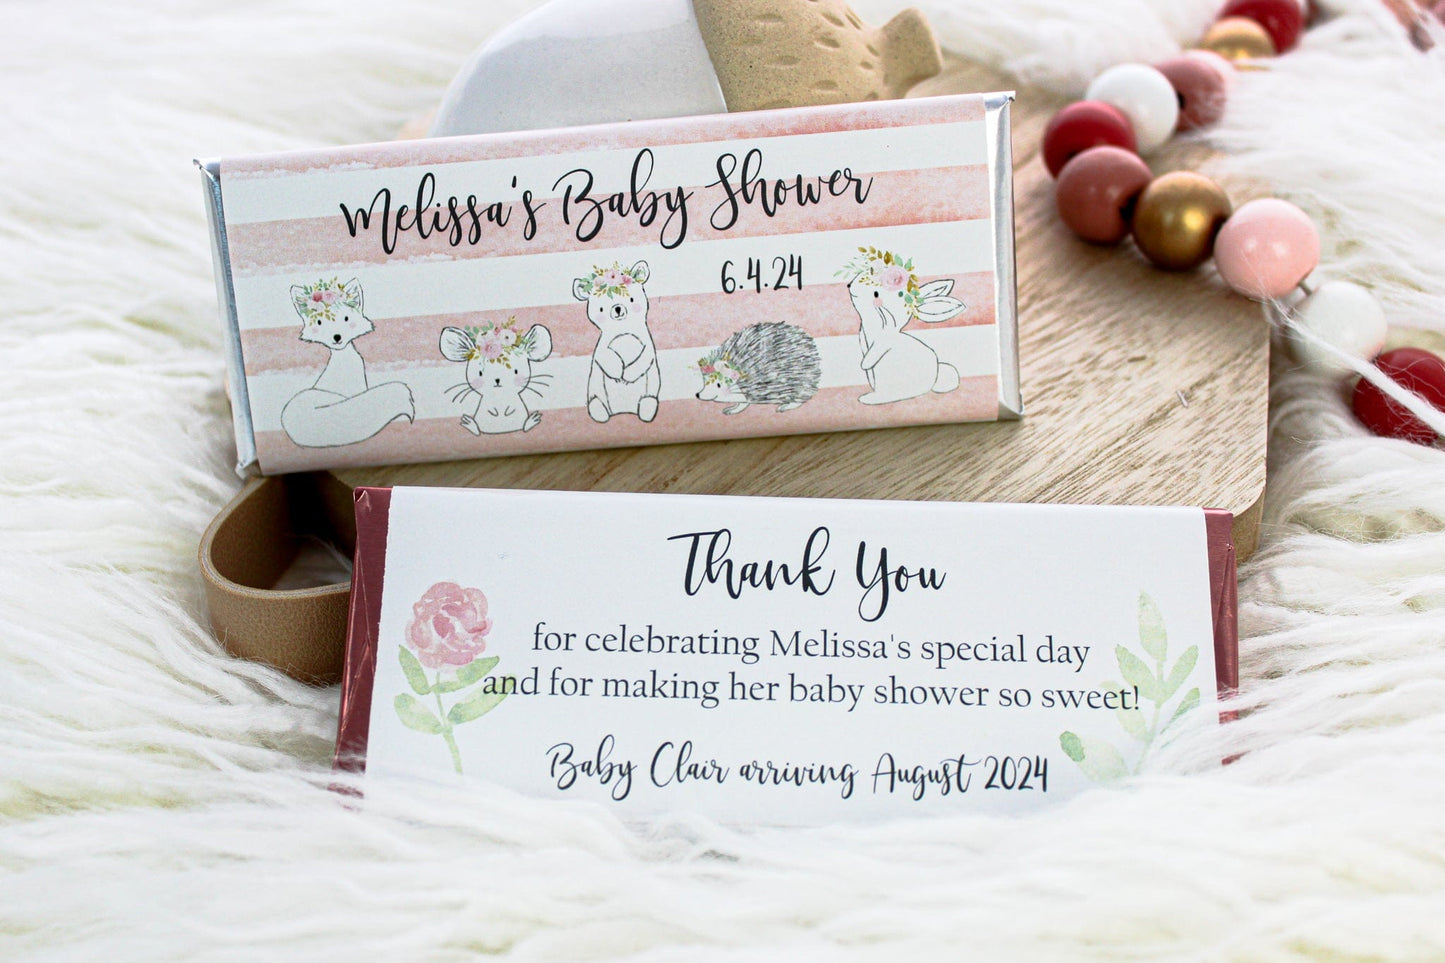 BS349 - Cute Woodland Animals with Flowers Baby Shower Candy Bar Wrappers Cute Woodland Animals with Flowers Baby Shower Candy Bar Wrappers Birth Announcement bs349